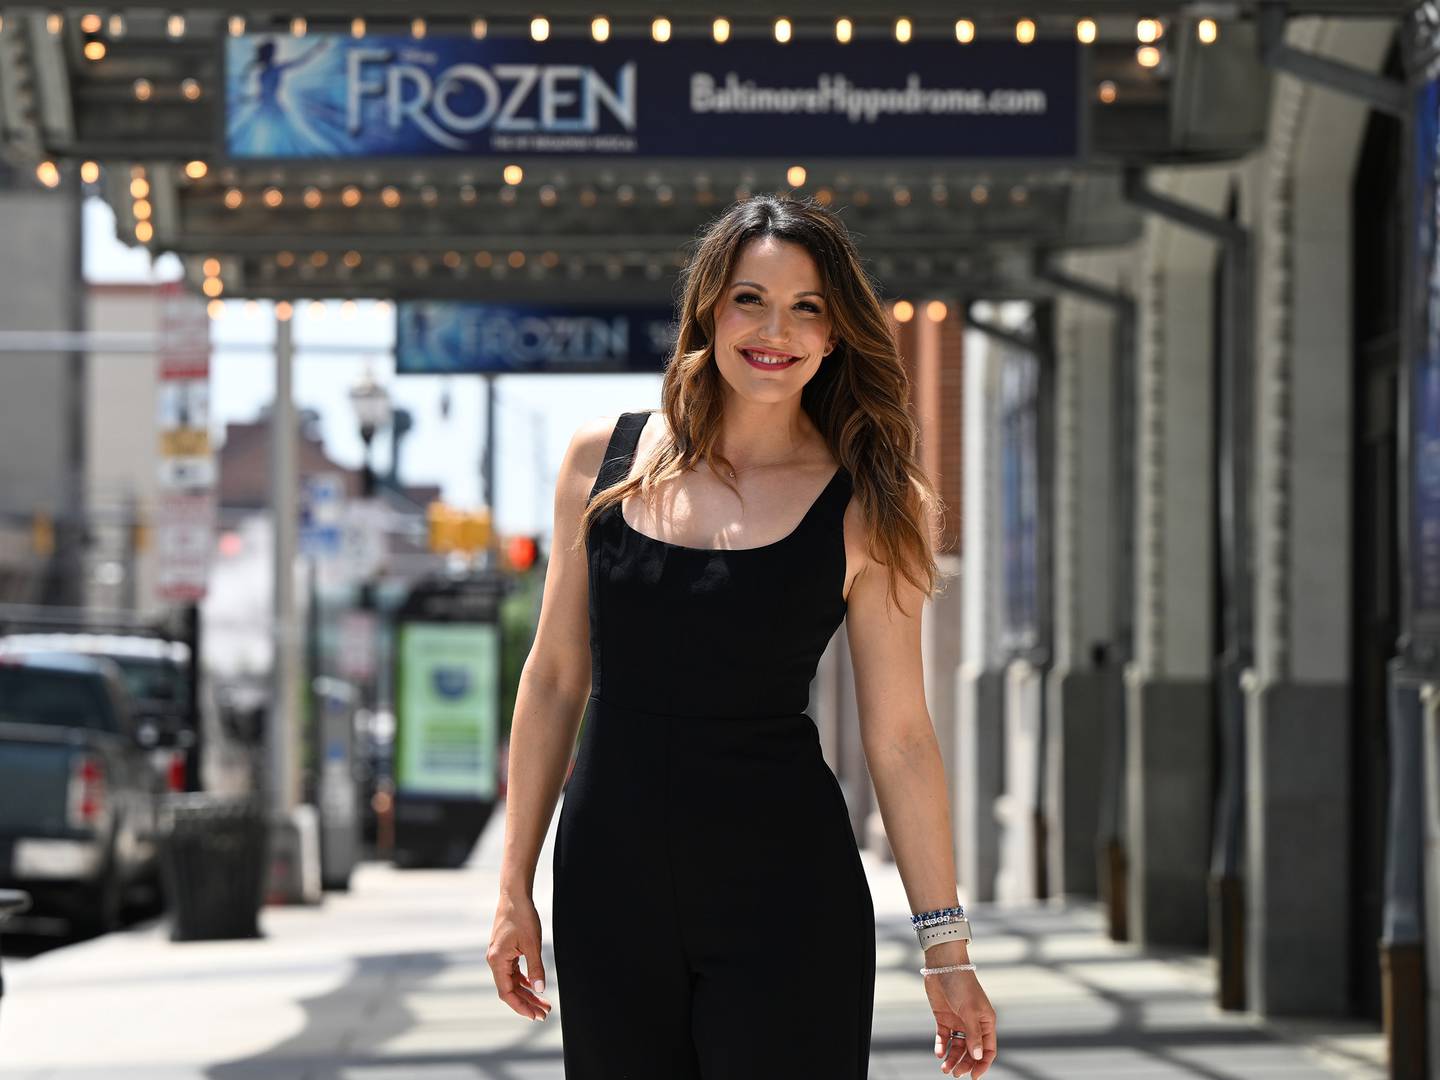 Caroline Bowman is photographed in front of the Hippodrome theater Tuesday, May 16, 2023 in Baltimore. Bowman stars in the Hippodrome’s “Frozen” which begins in June.